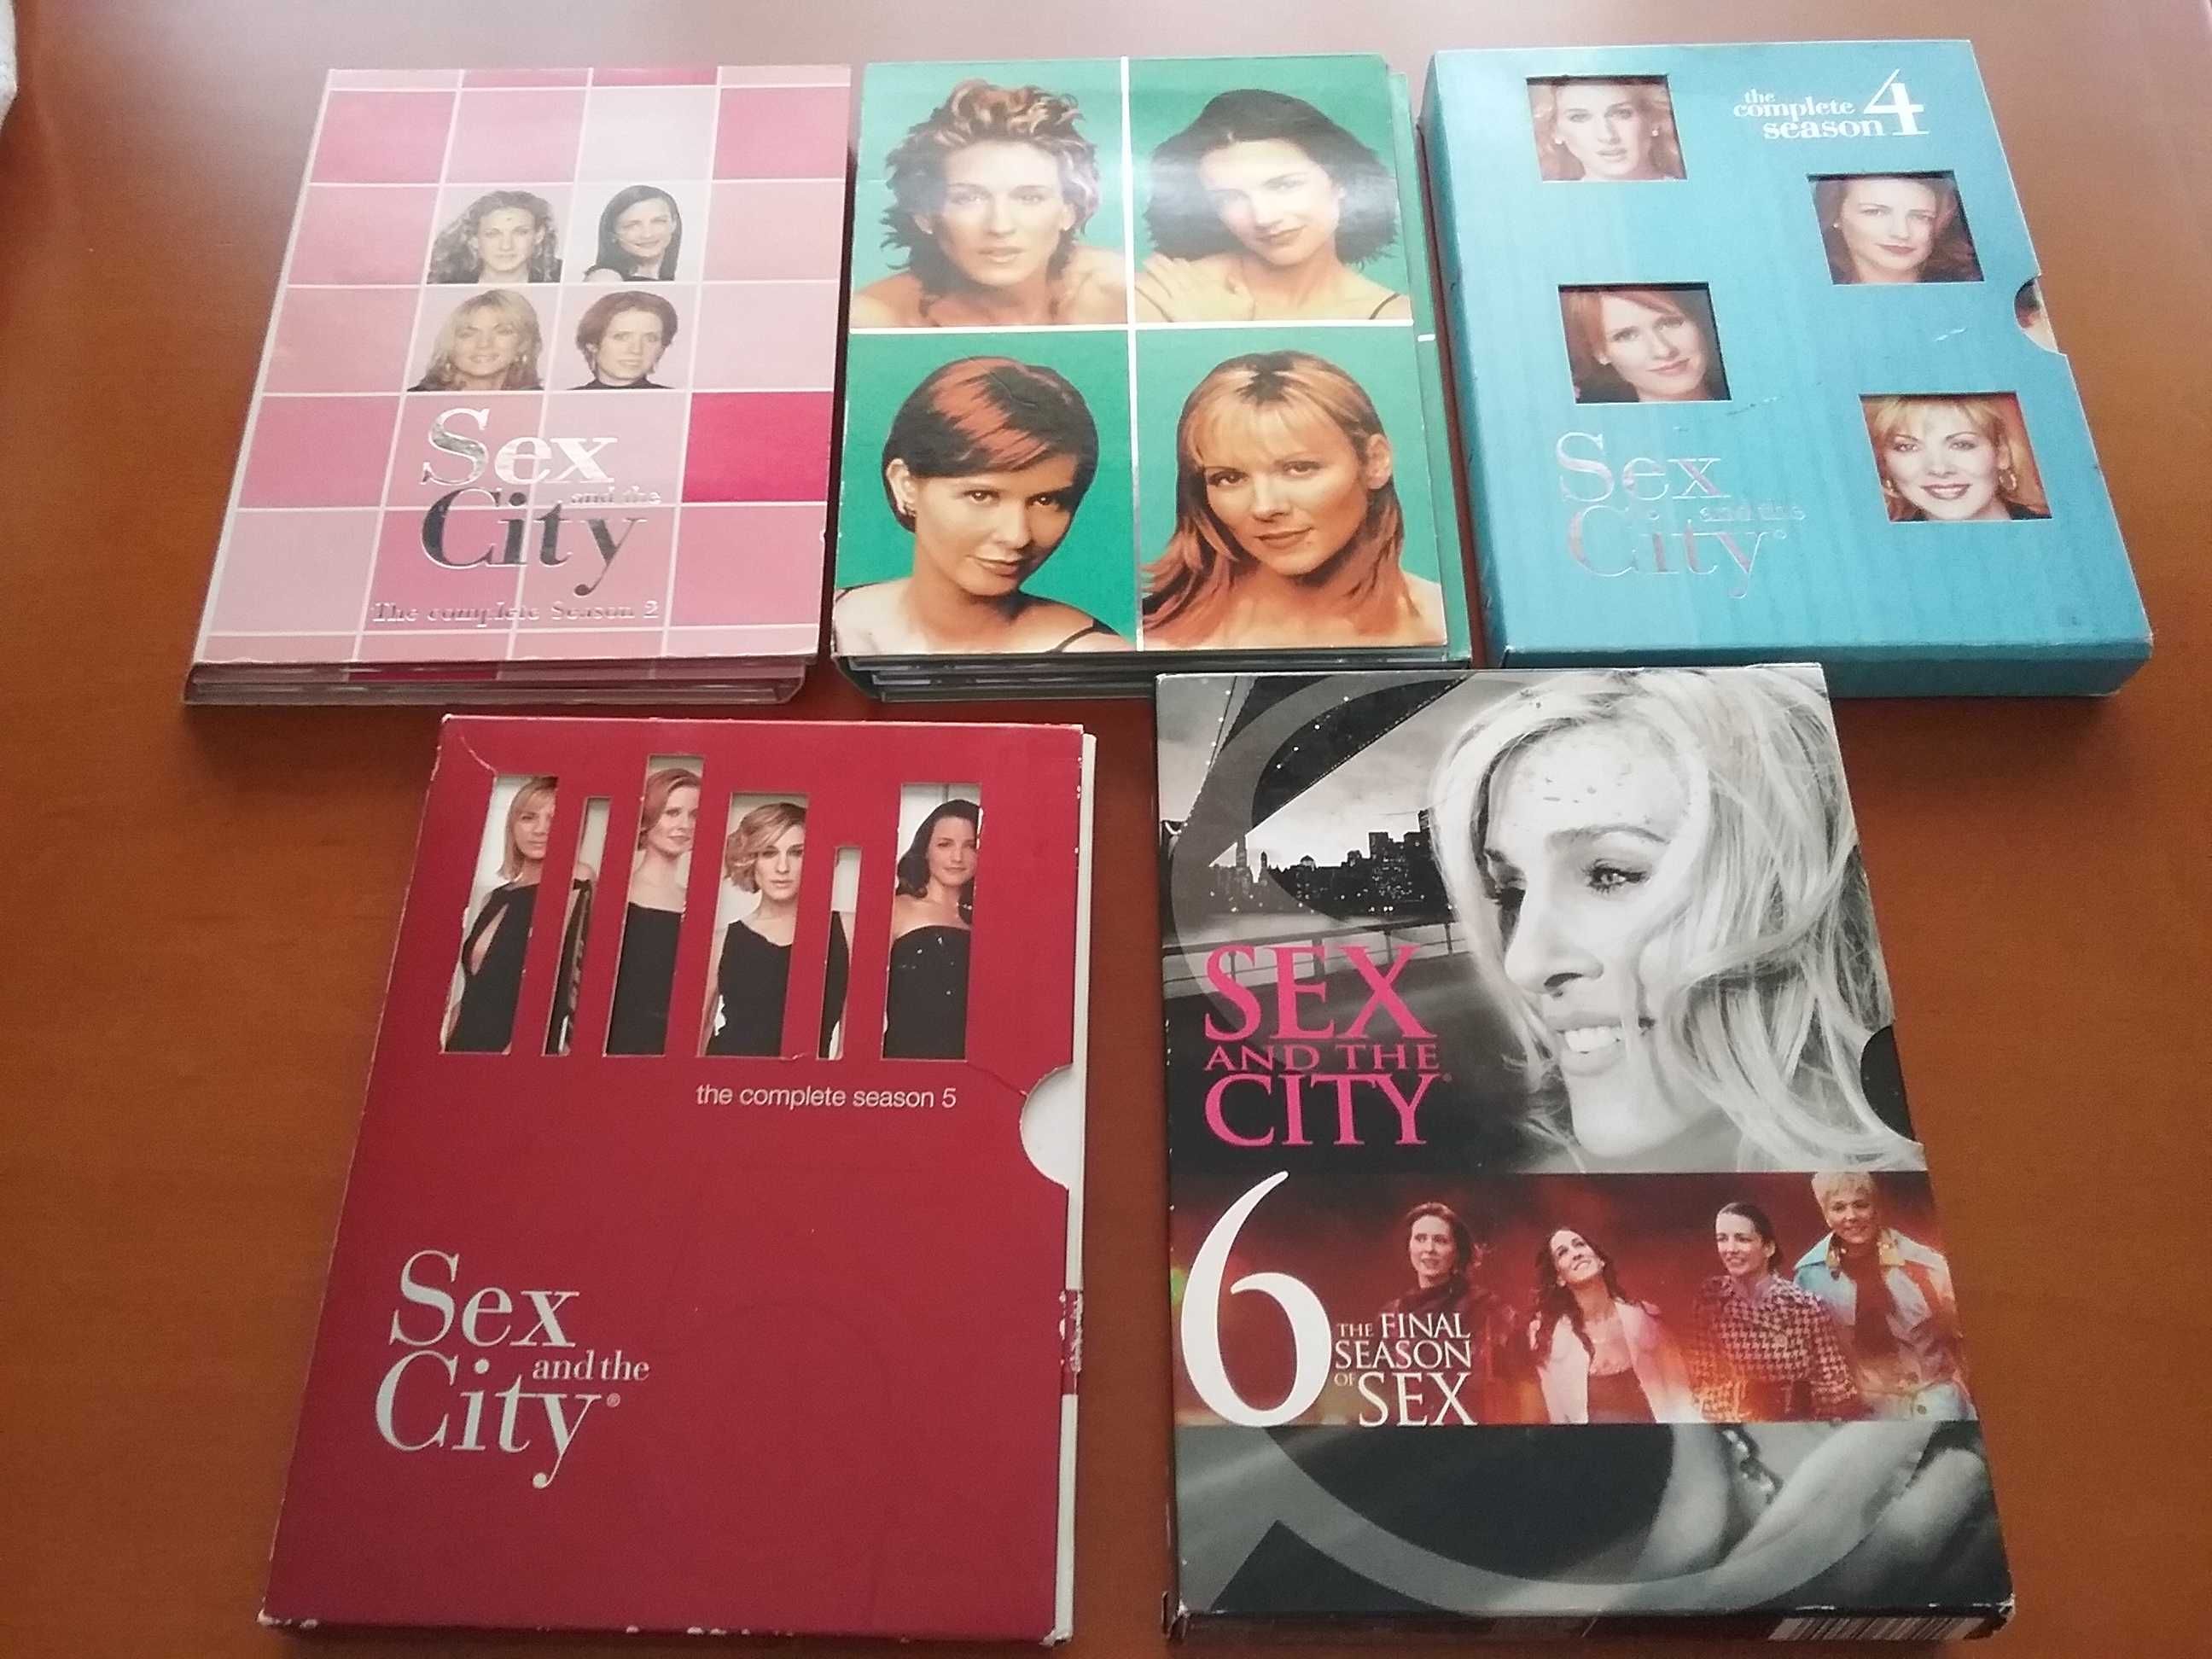 Sex and the City the complete season